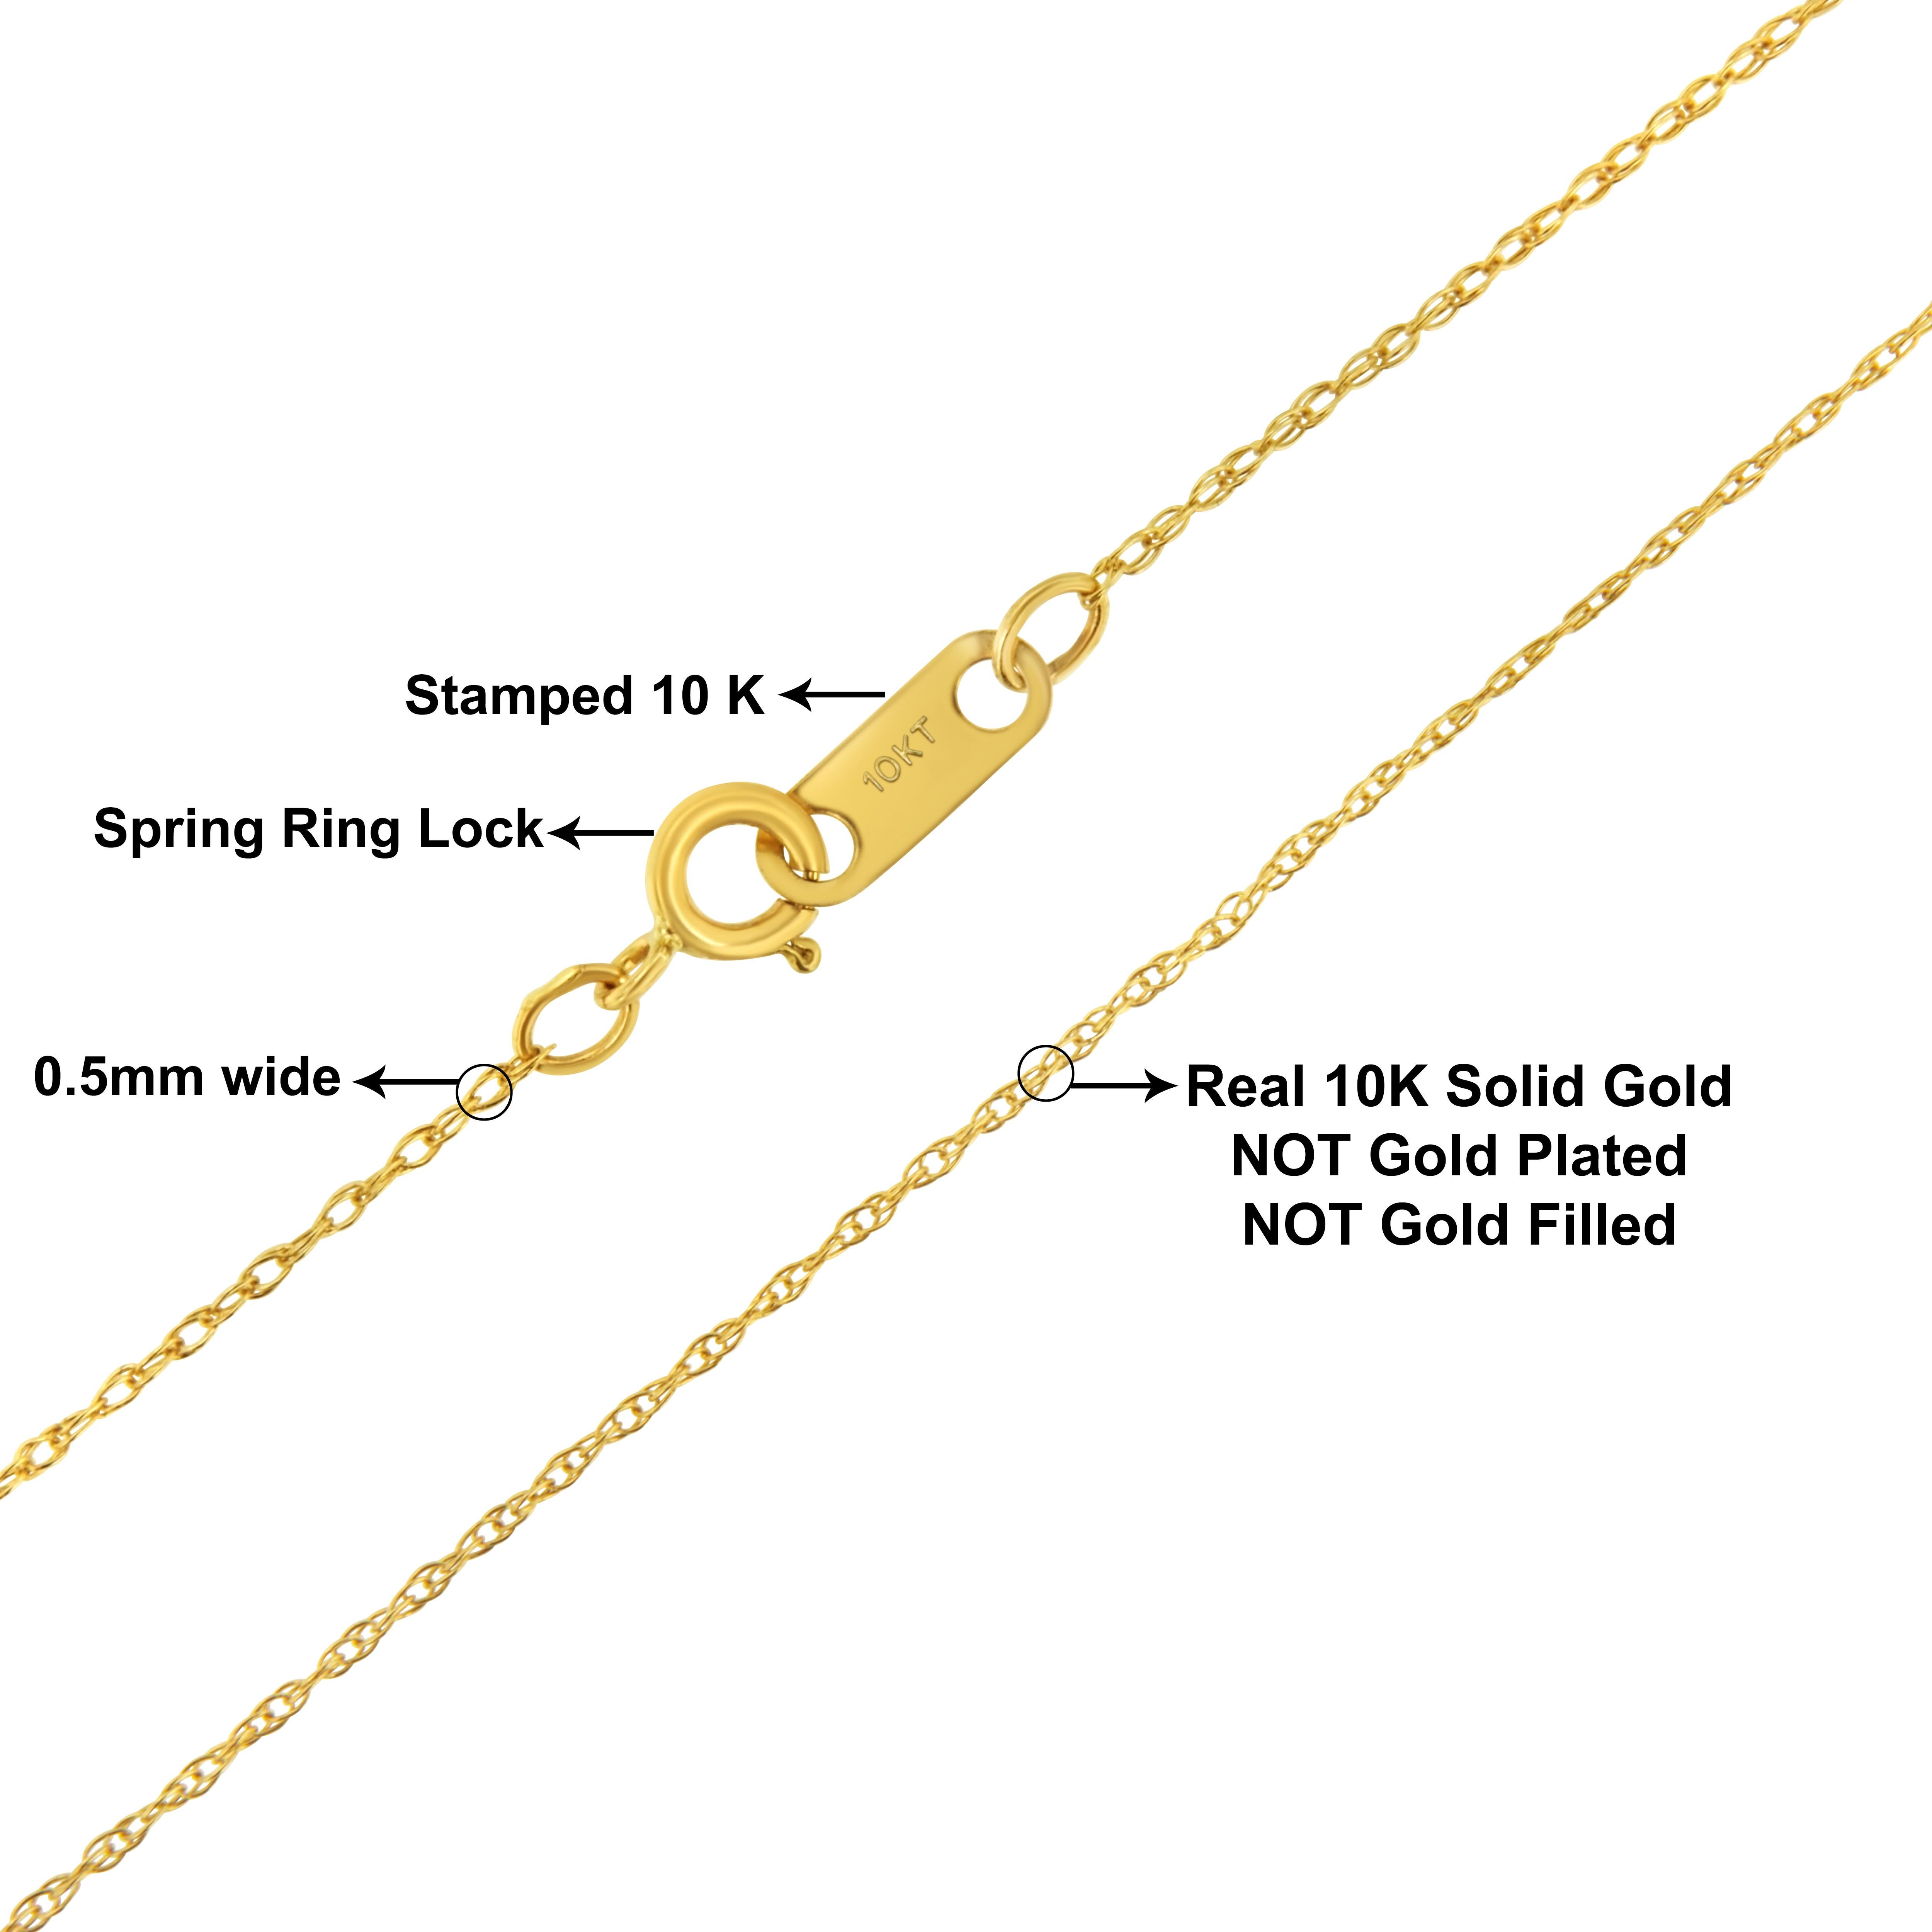 Elevate your jewelry collection with our Solid 10K Yellow Gold 0.5mm Slim and Dainty Unisex 18